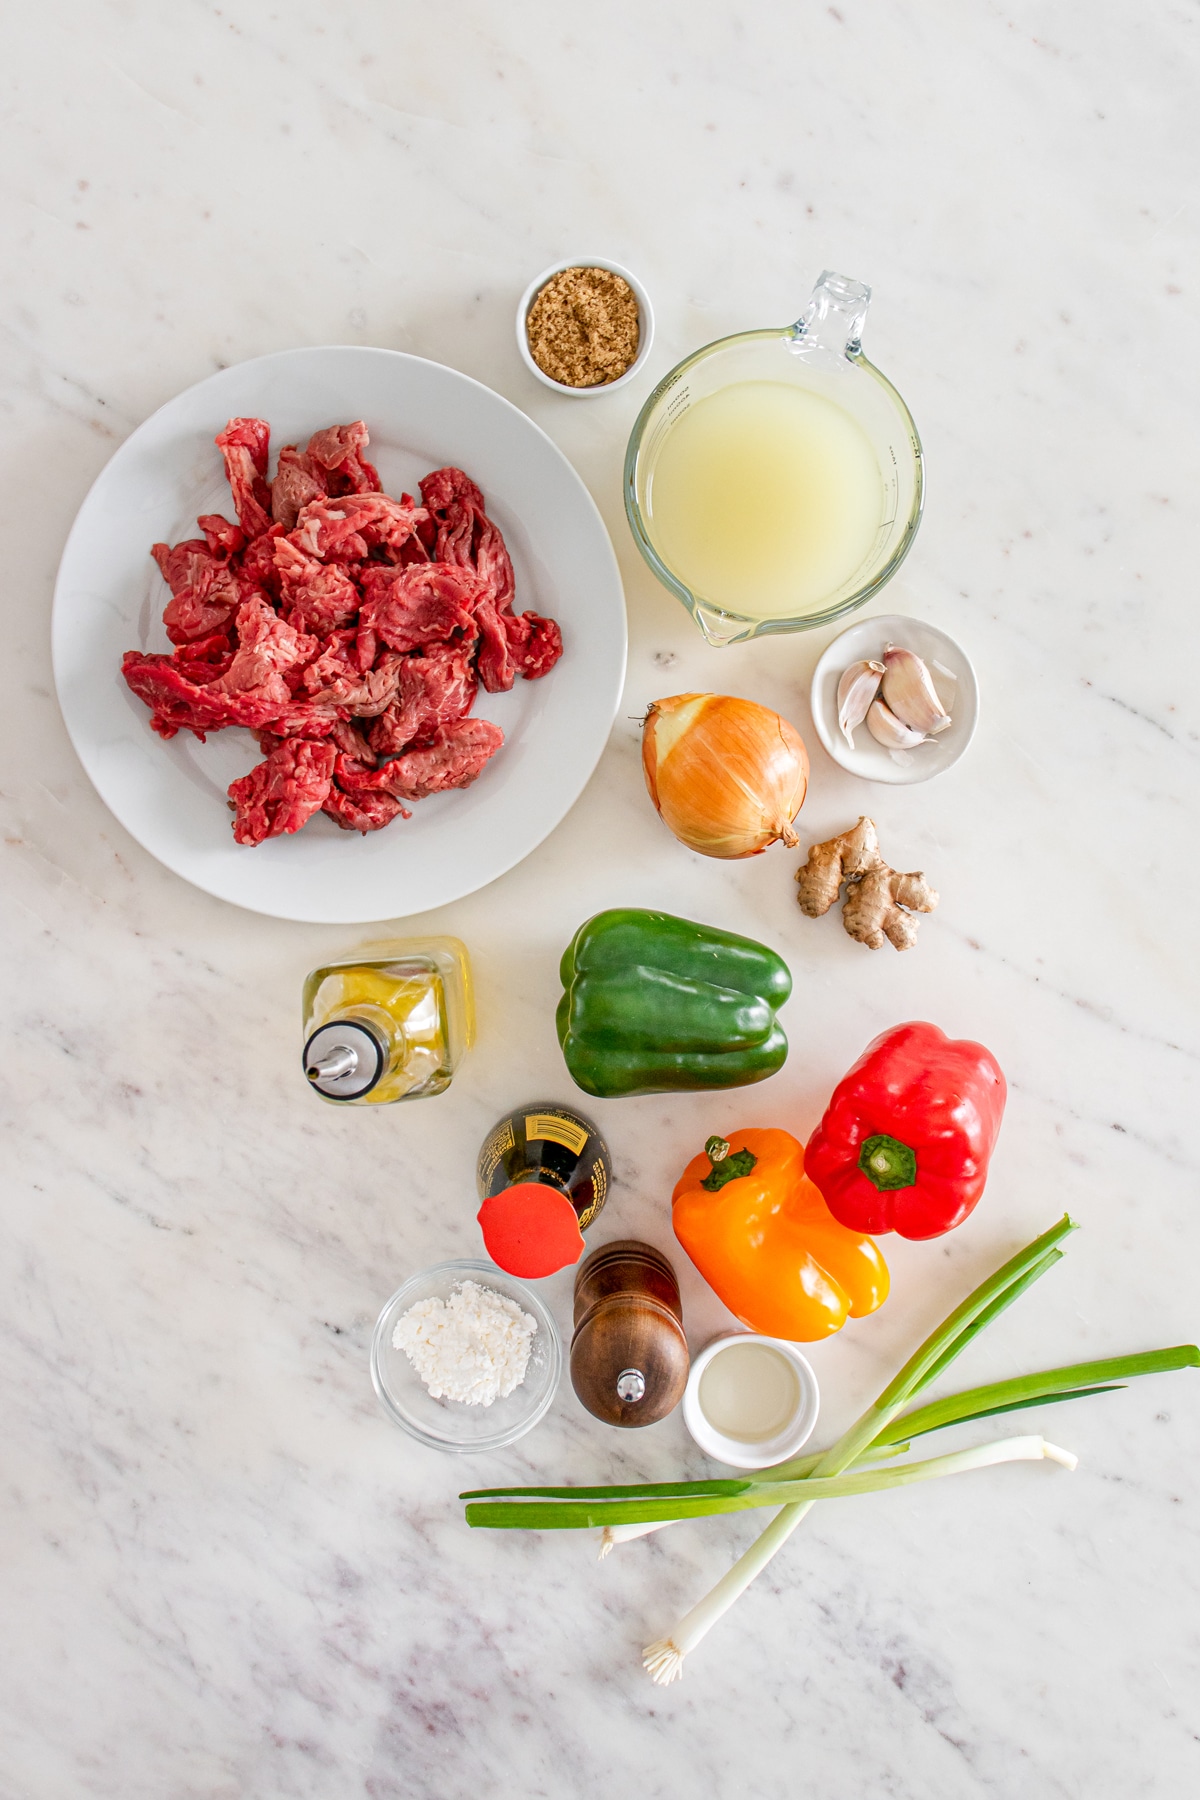 Assorted ingredients for cooking, including beef, bell peppers, onions, and spices, arranged neatly on a marble surface.